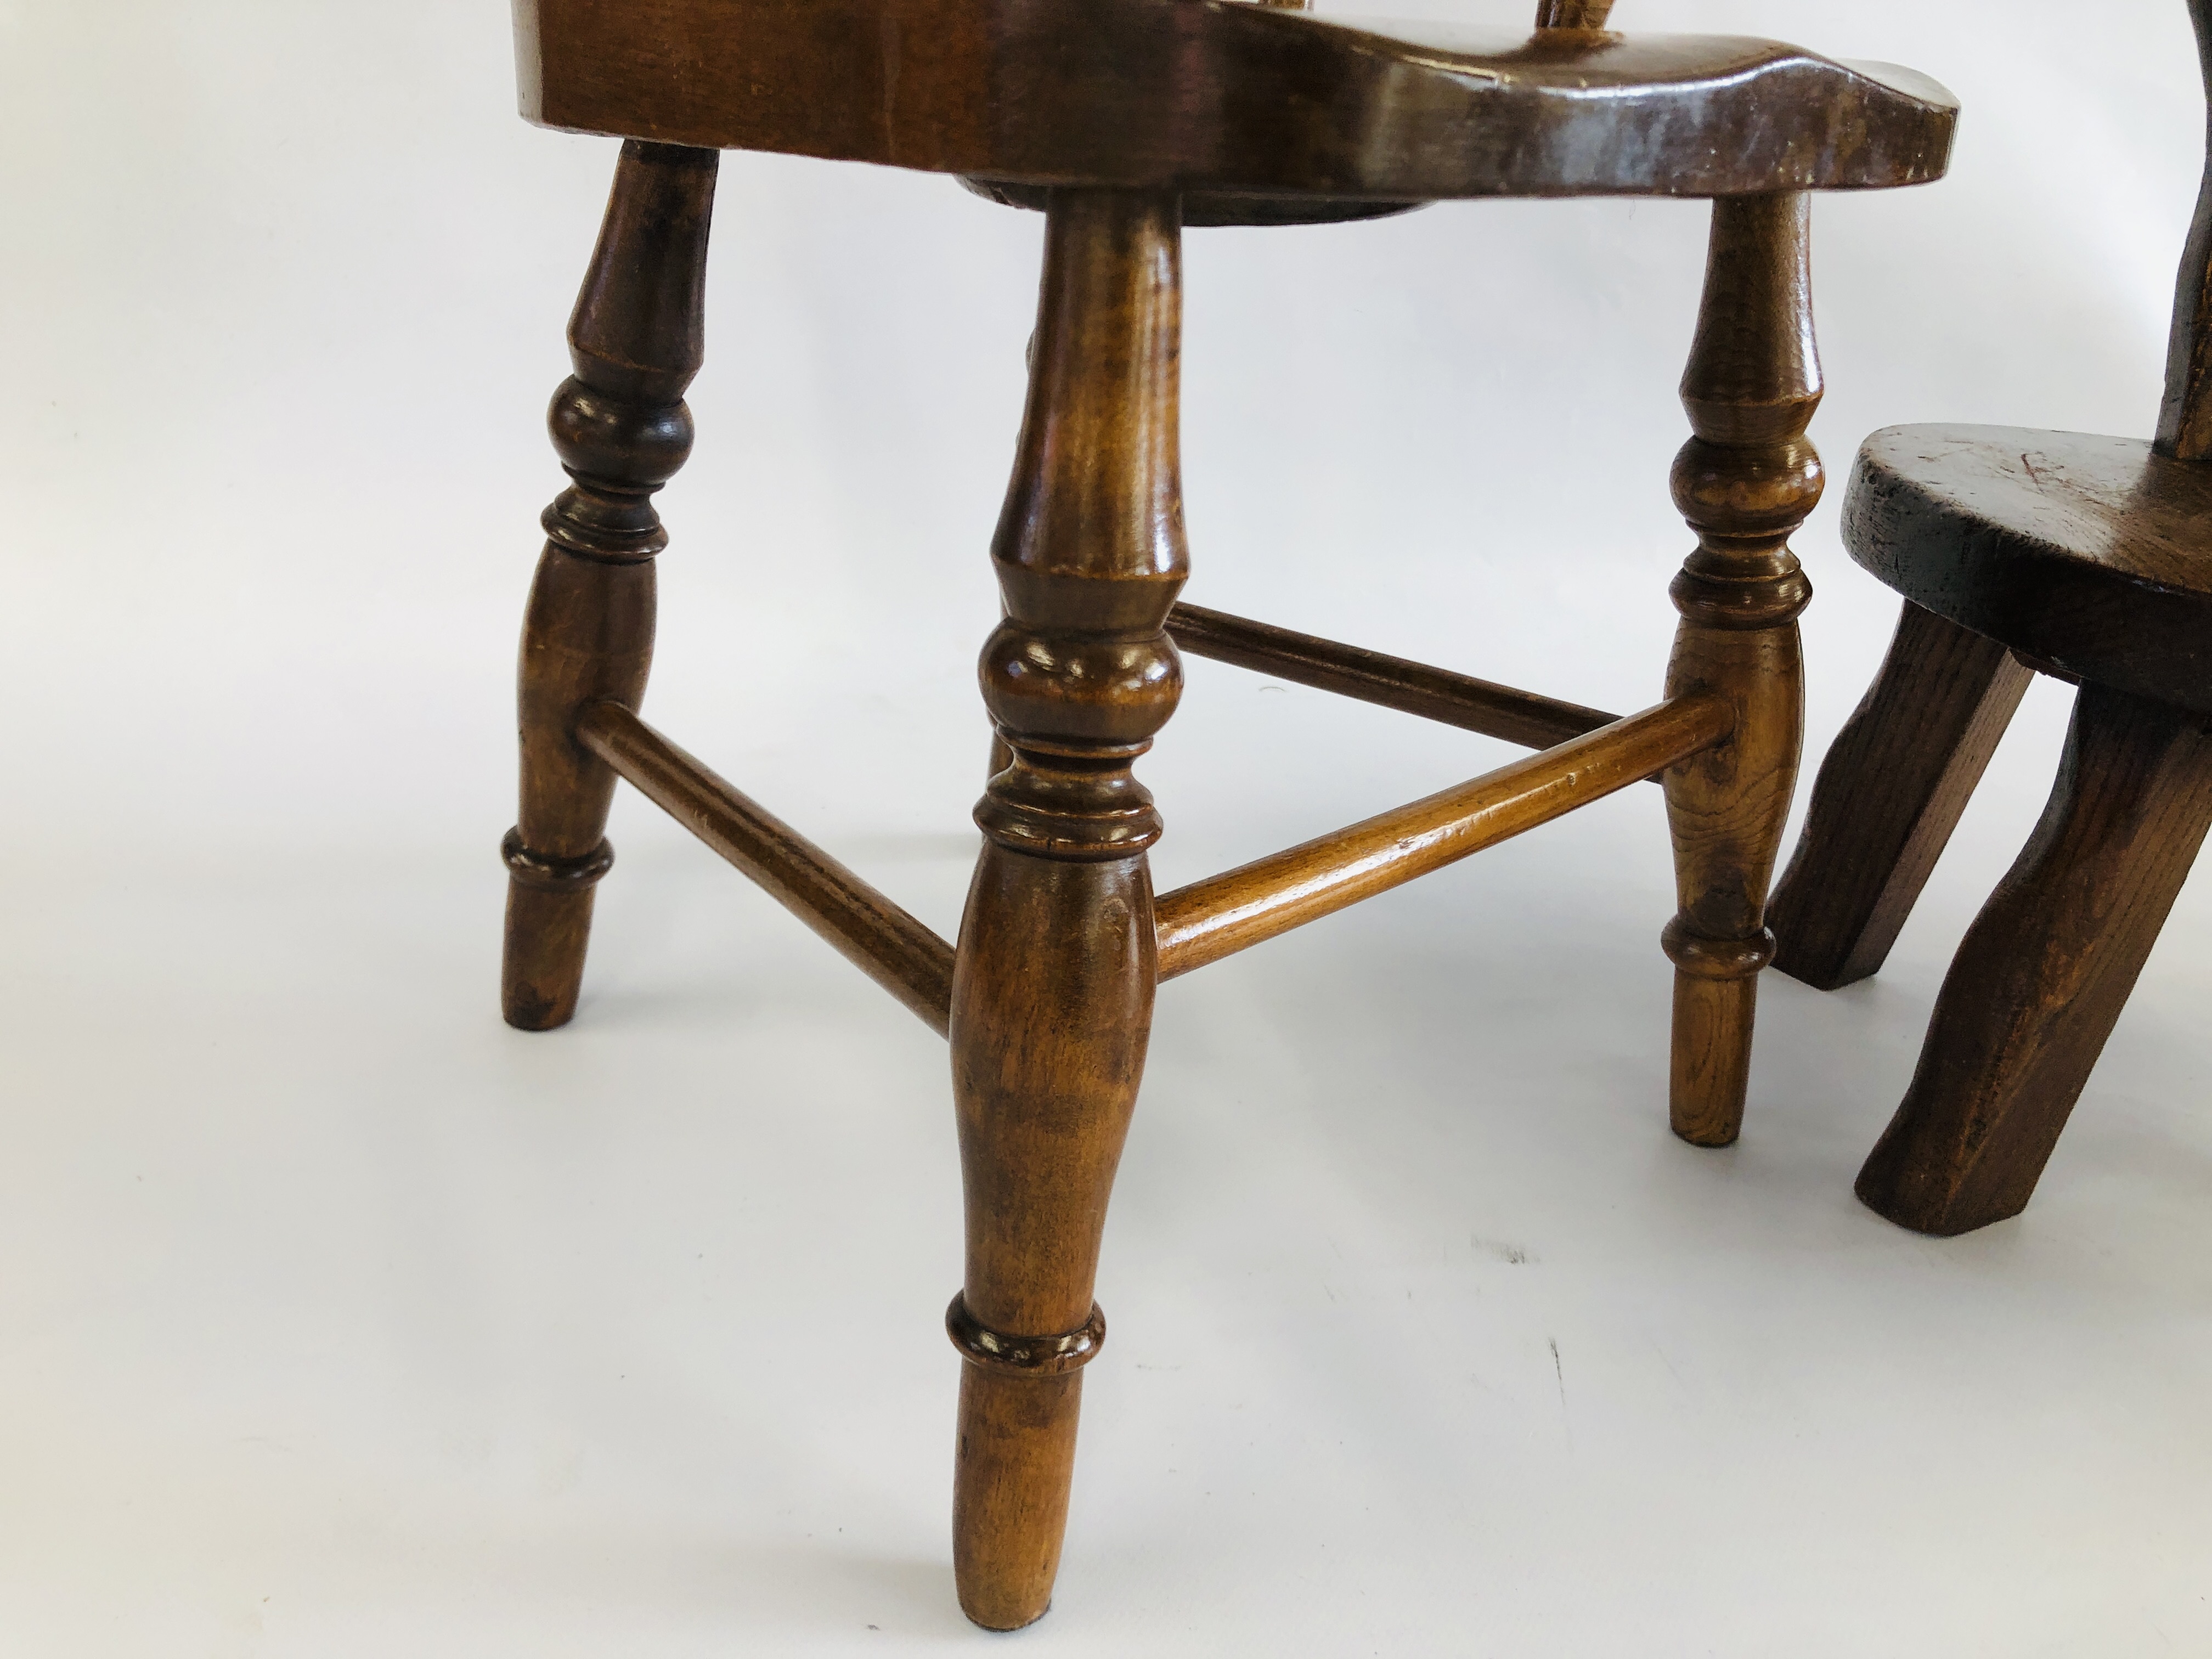 A VINTAGE CHILD'S COMMODE CHAIR ALONG WITH AN OAK CHILD'S CHAIR WITH CARVED BACK. - Image 4 of 7